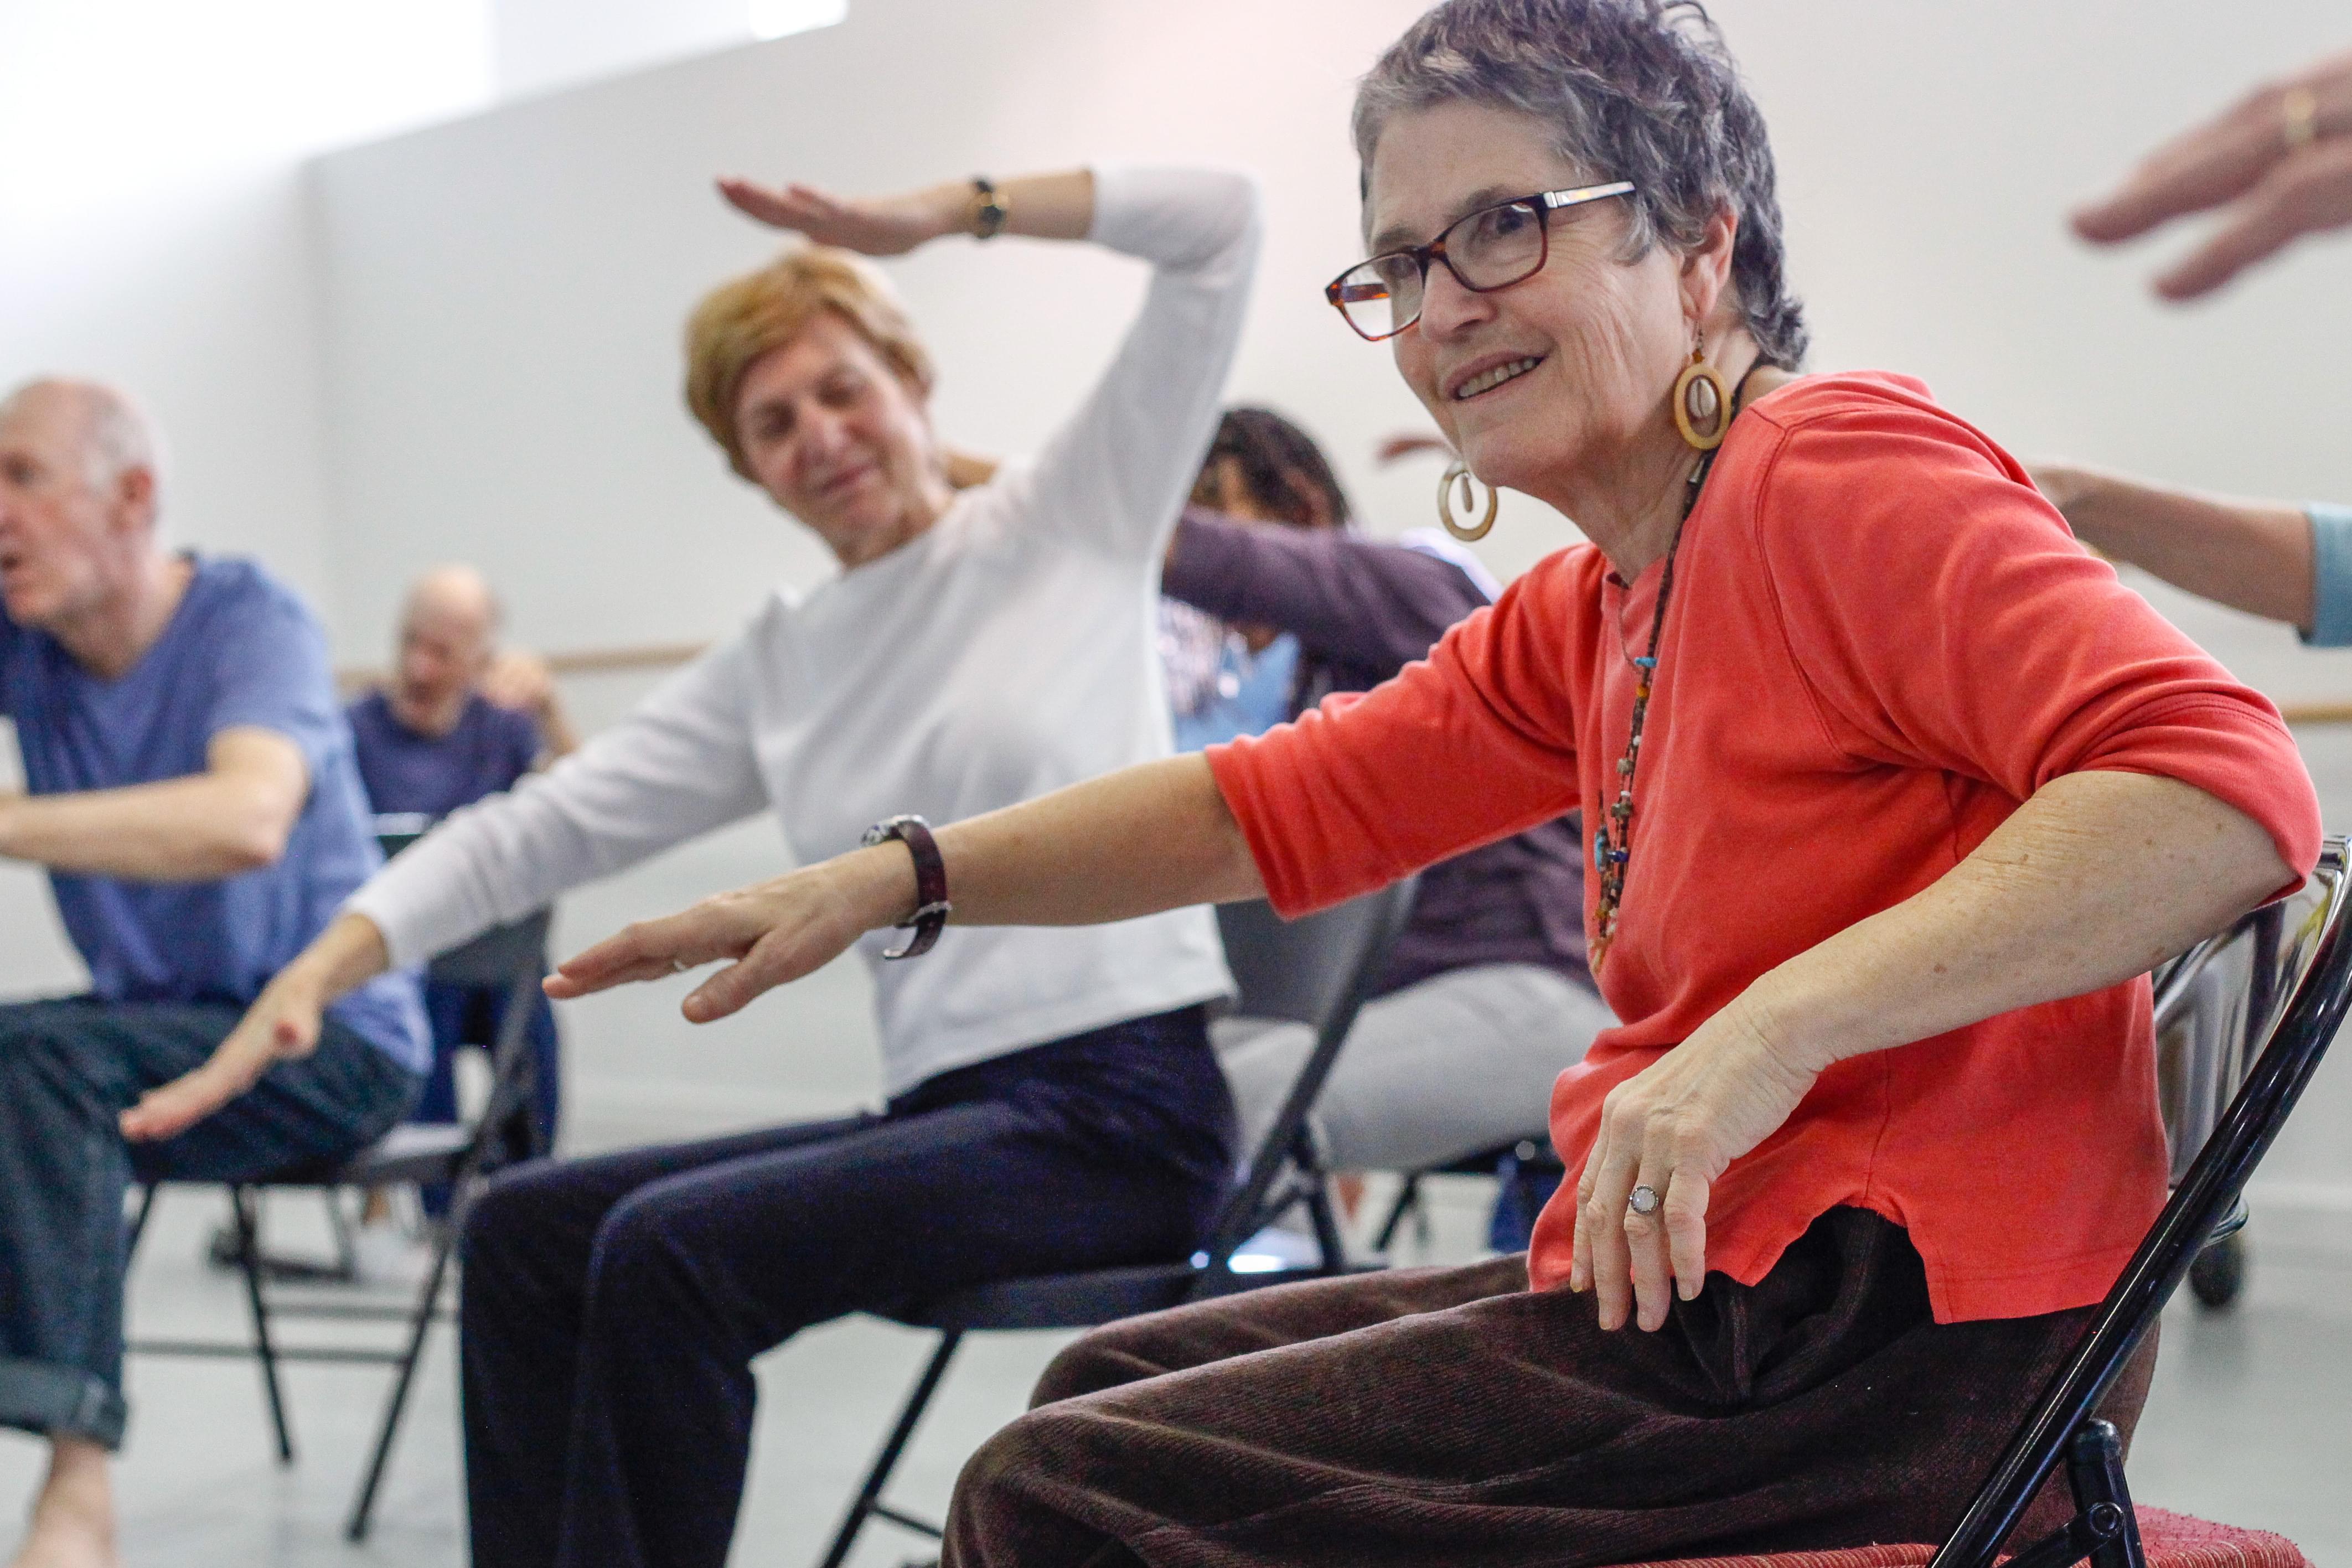 The Mark Morris Dance Group offers classes to people with Parkinson’s disease in 100 communities around the world, including right here in Champaign-Urbana.